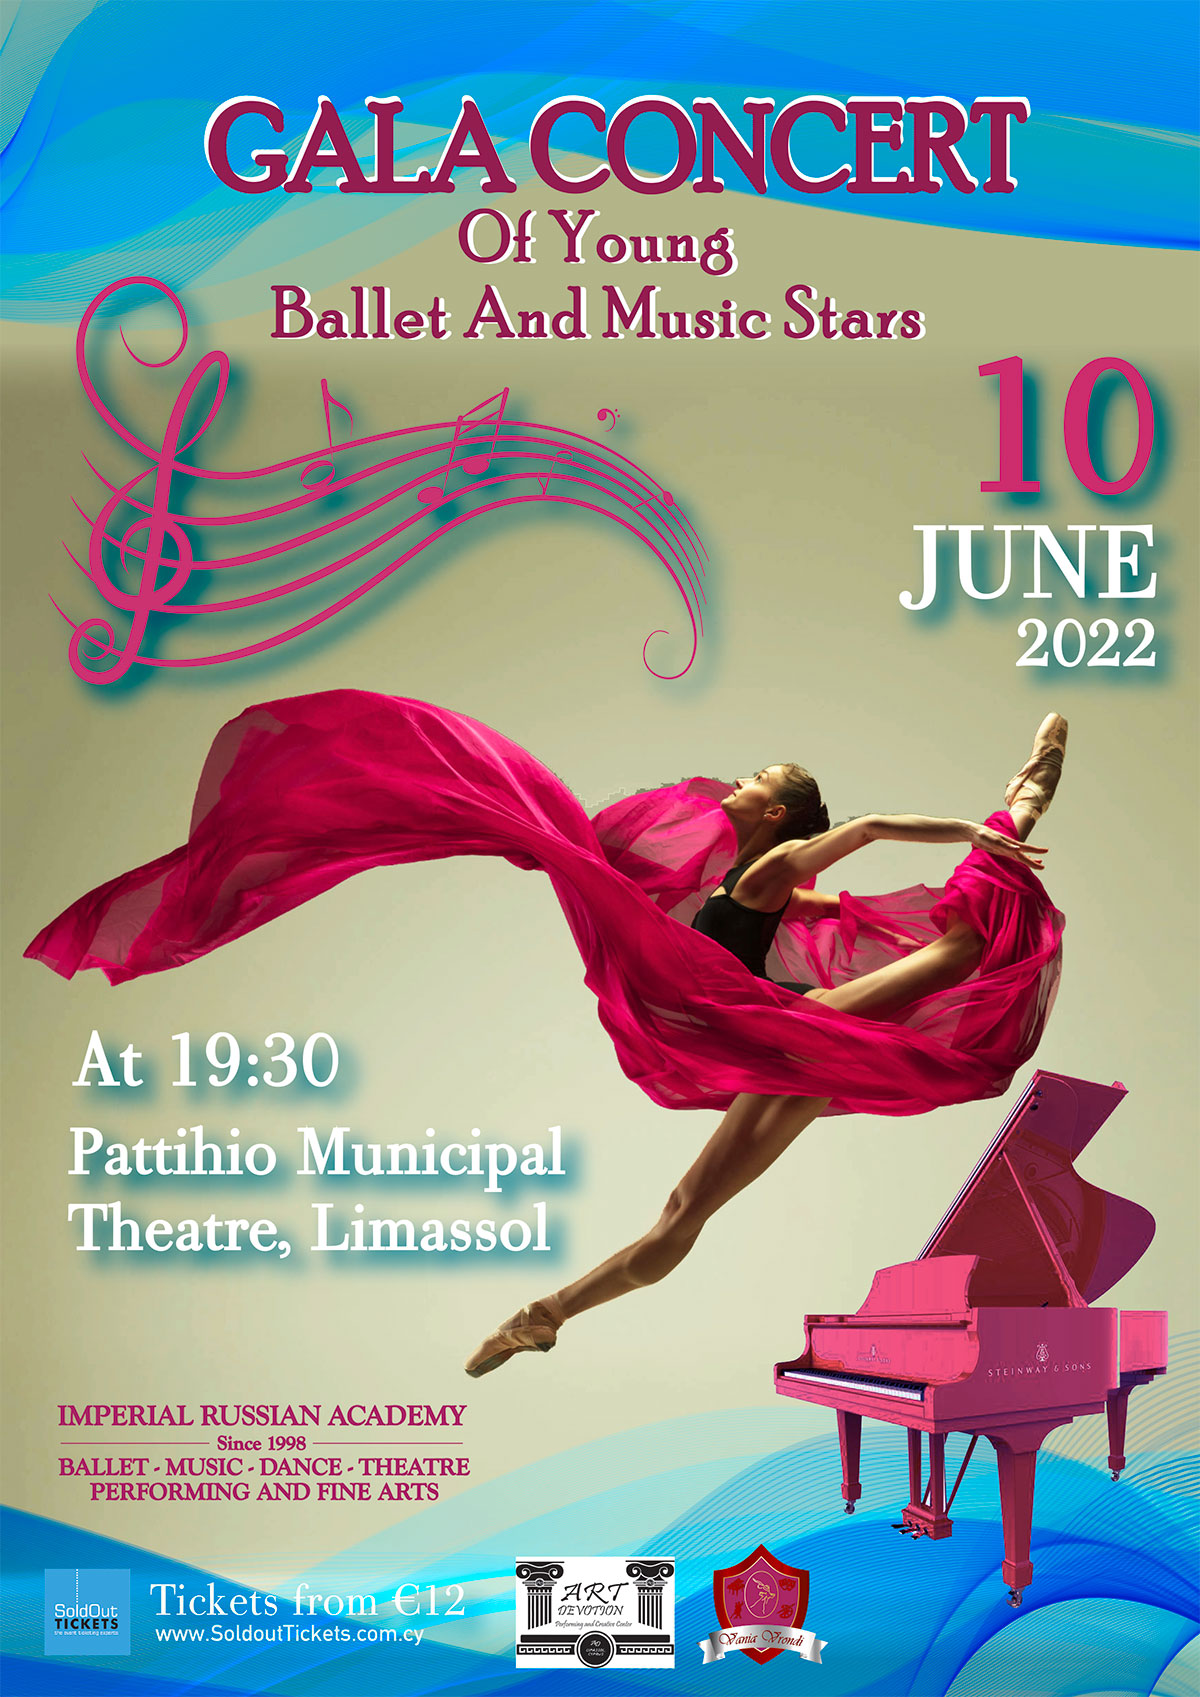 GALA CONCERT - YOUNG BALLET AND MUSIC STARS